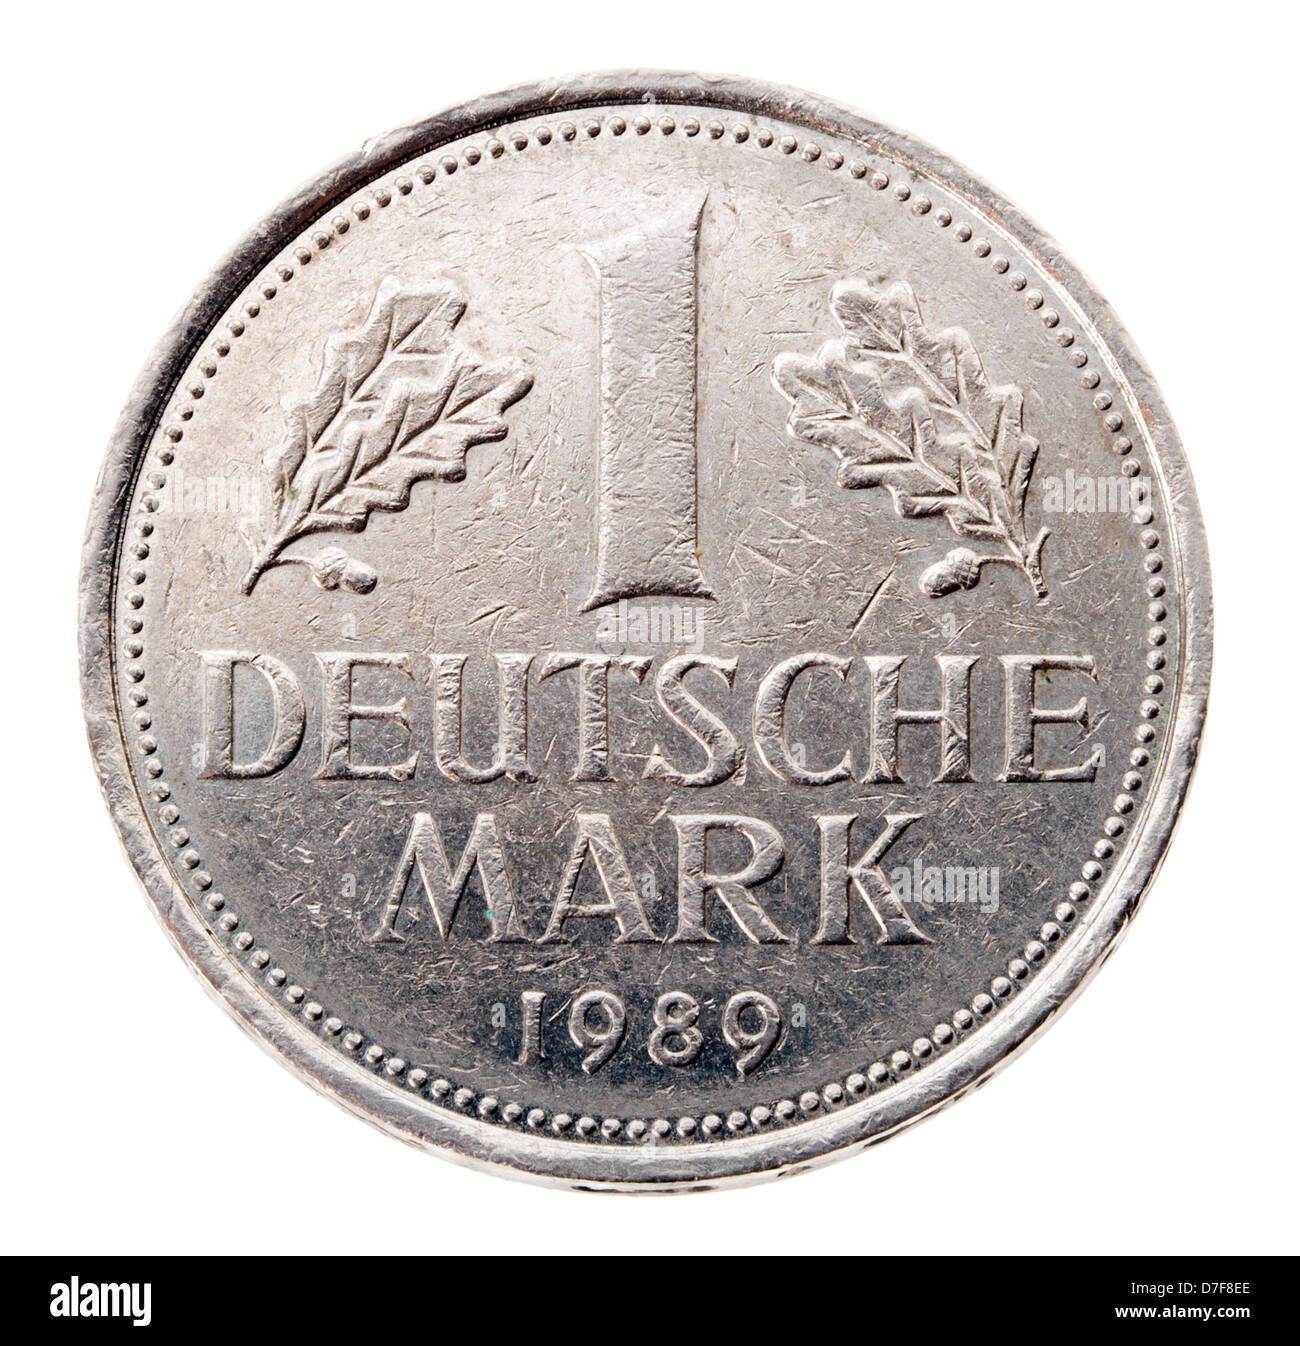 Frontal view obverse (heads) side a 1 Deutsche Mark (DM) coin minted in 1989. Depicted is denomination coin between Oak leaves. Stock Photo